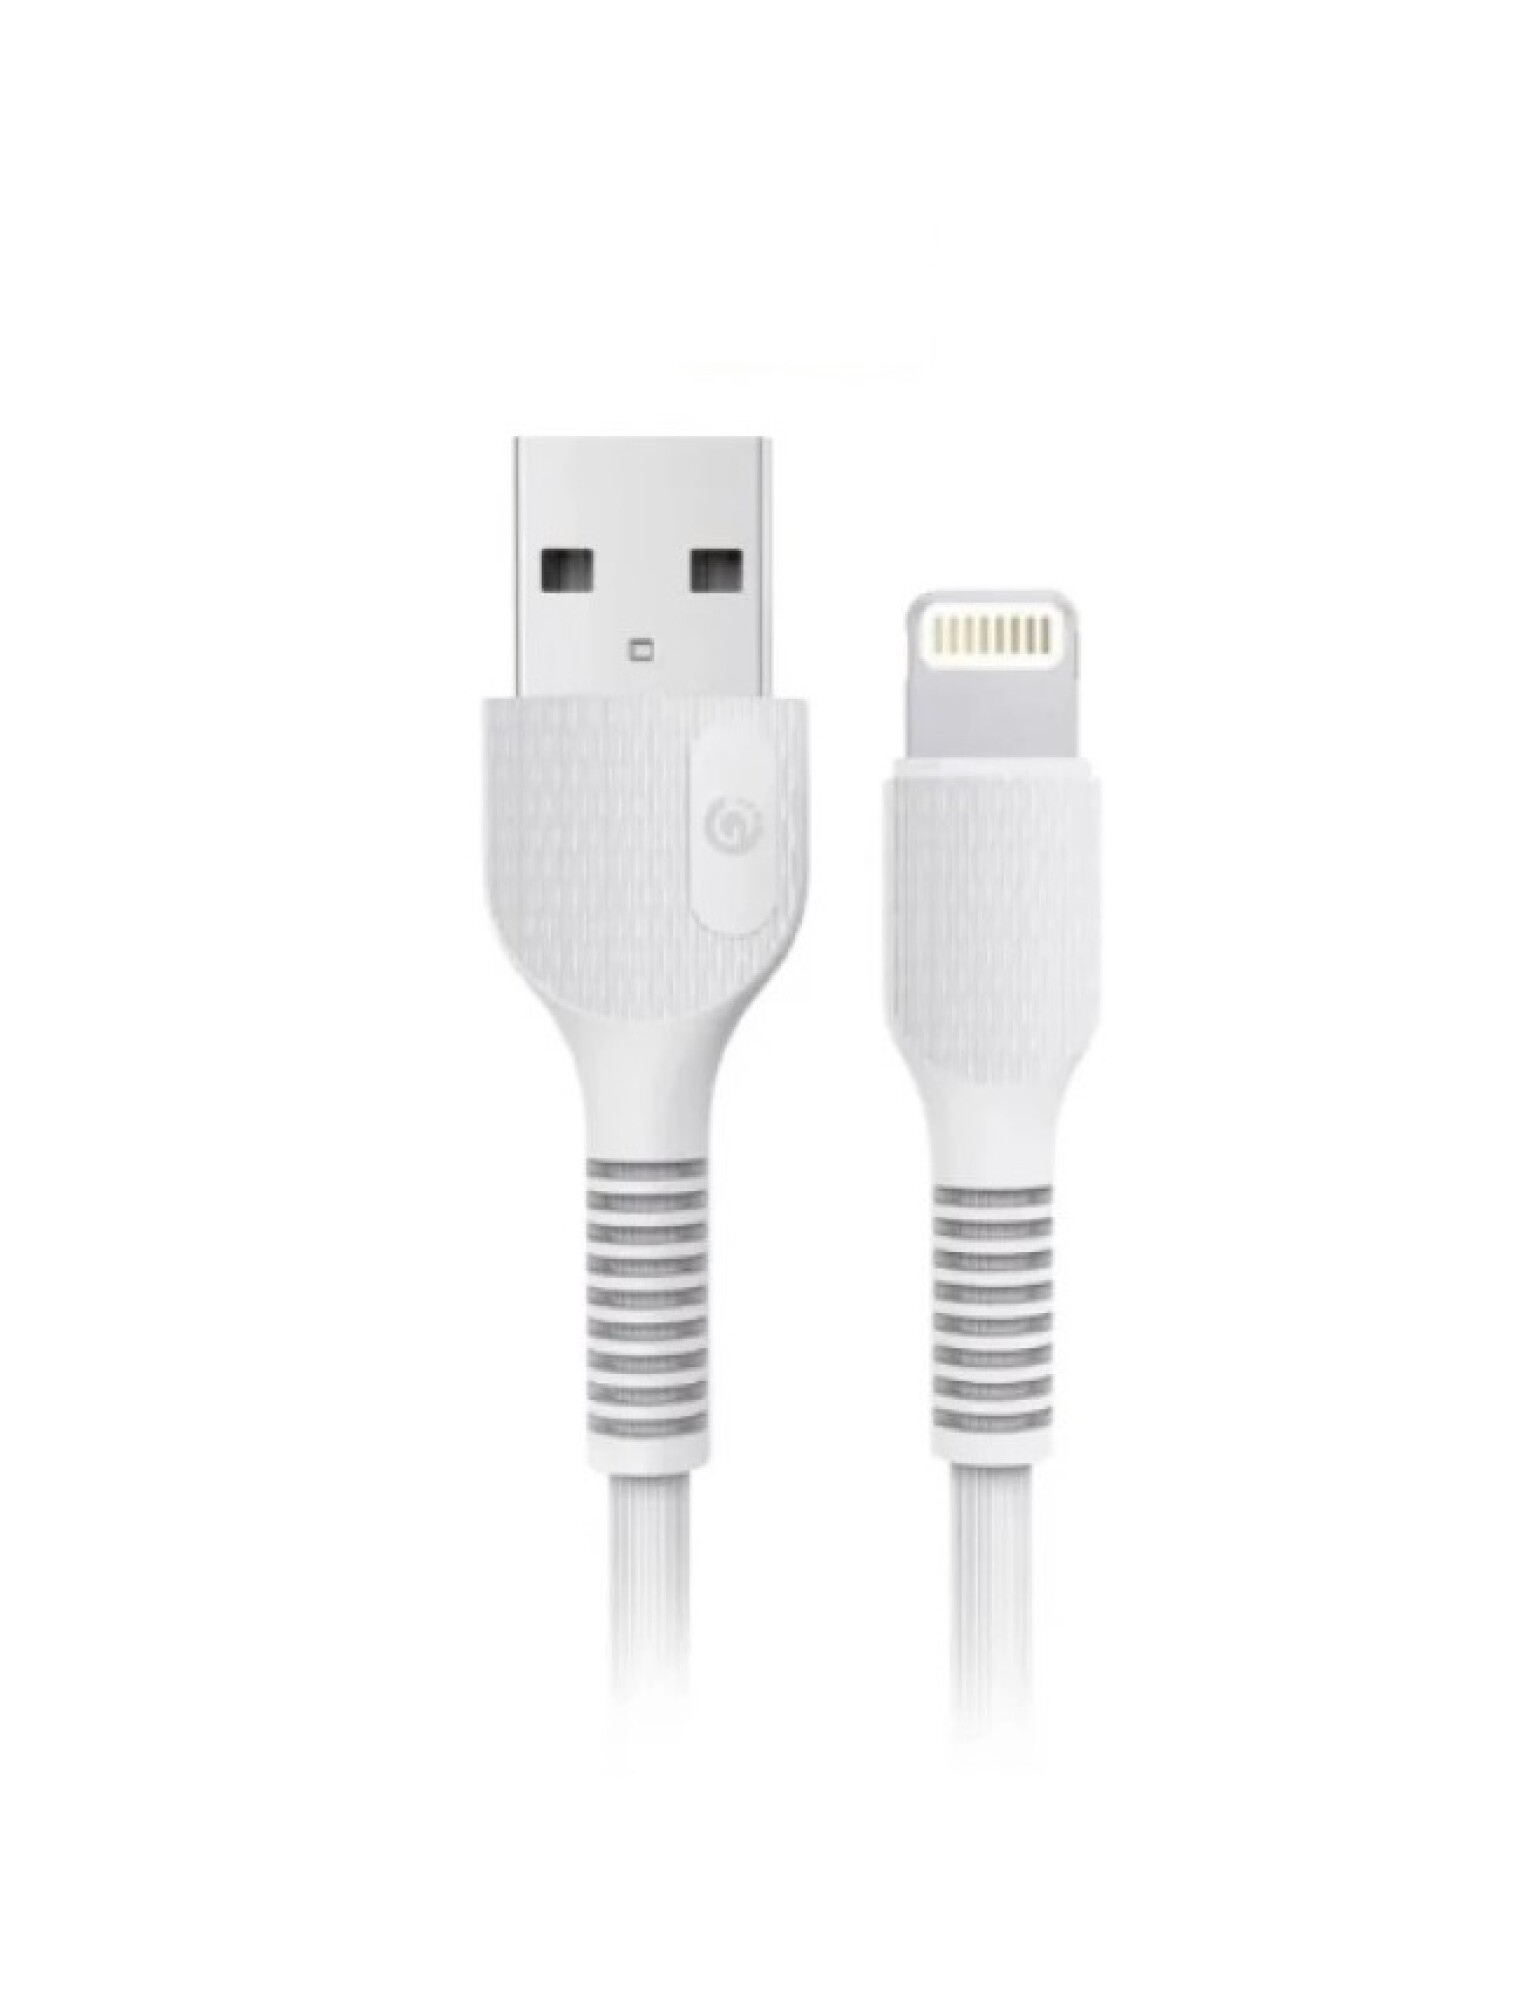 Cable iPhone iPad 5/6/7/8 Lightning En Caja Cable 1 Mts — MdeOfertas